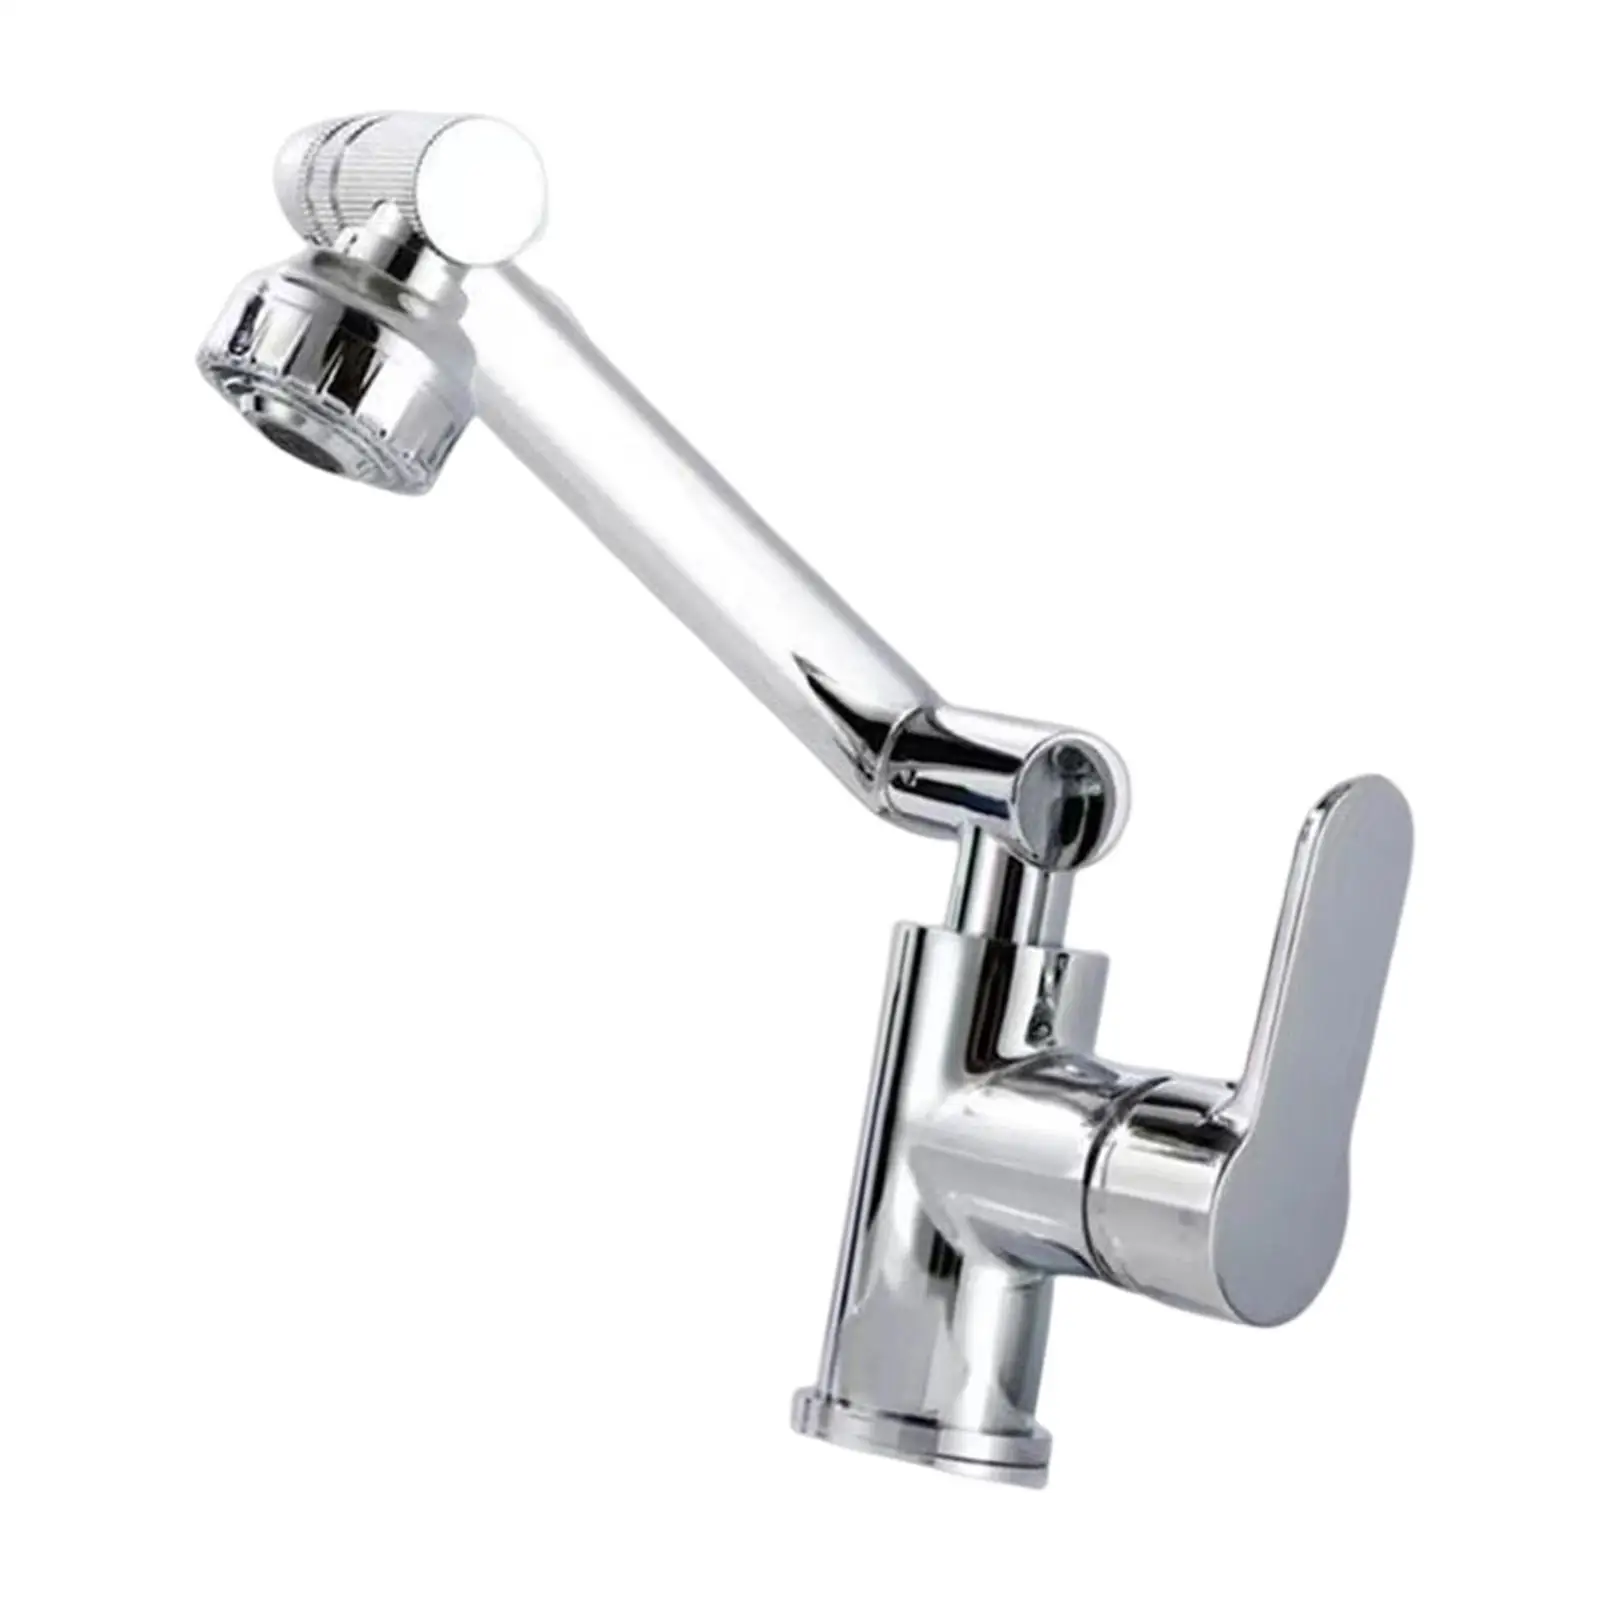 Bathroom Faucet Basin Mixer Tap 360 Degree Rotary for Office Outdoor Sink